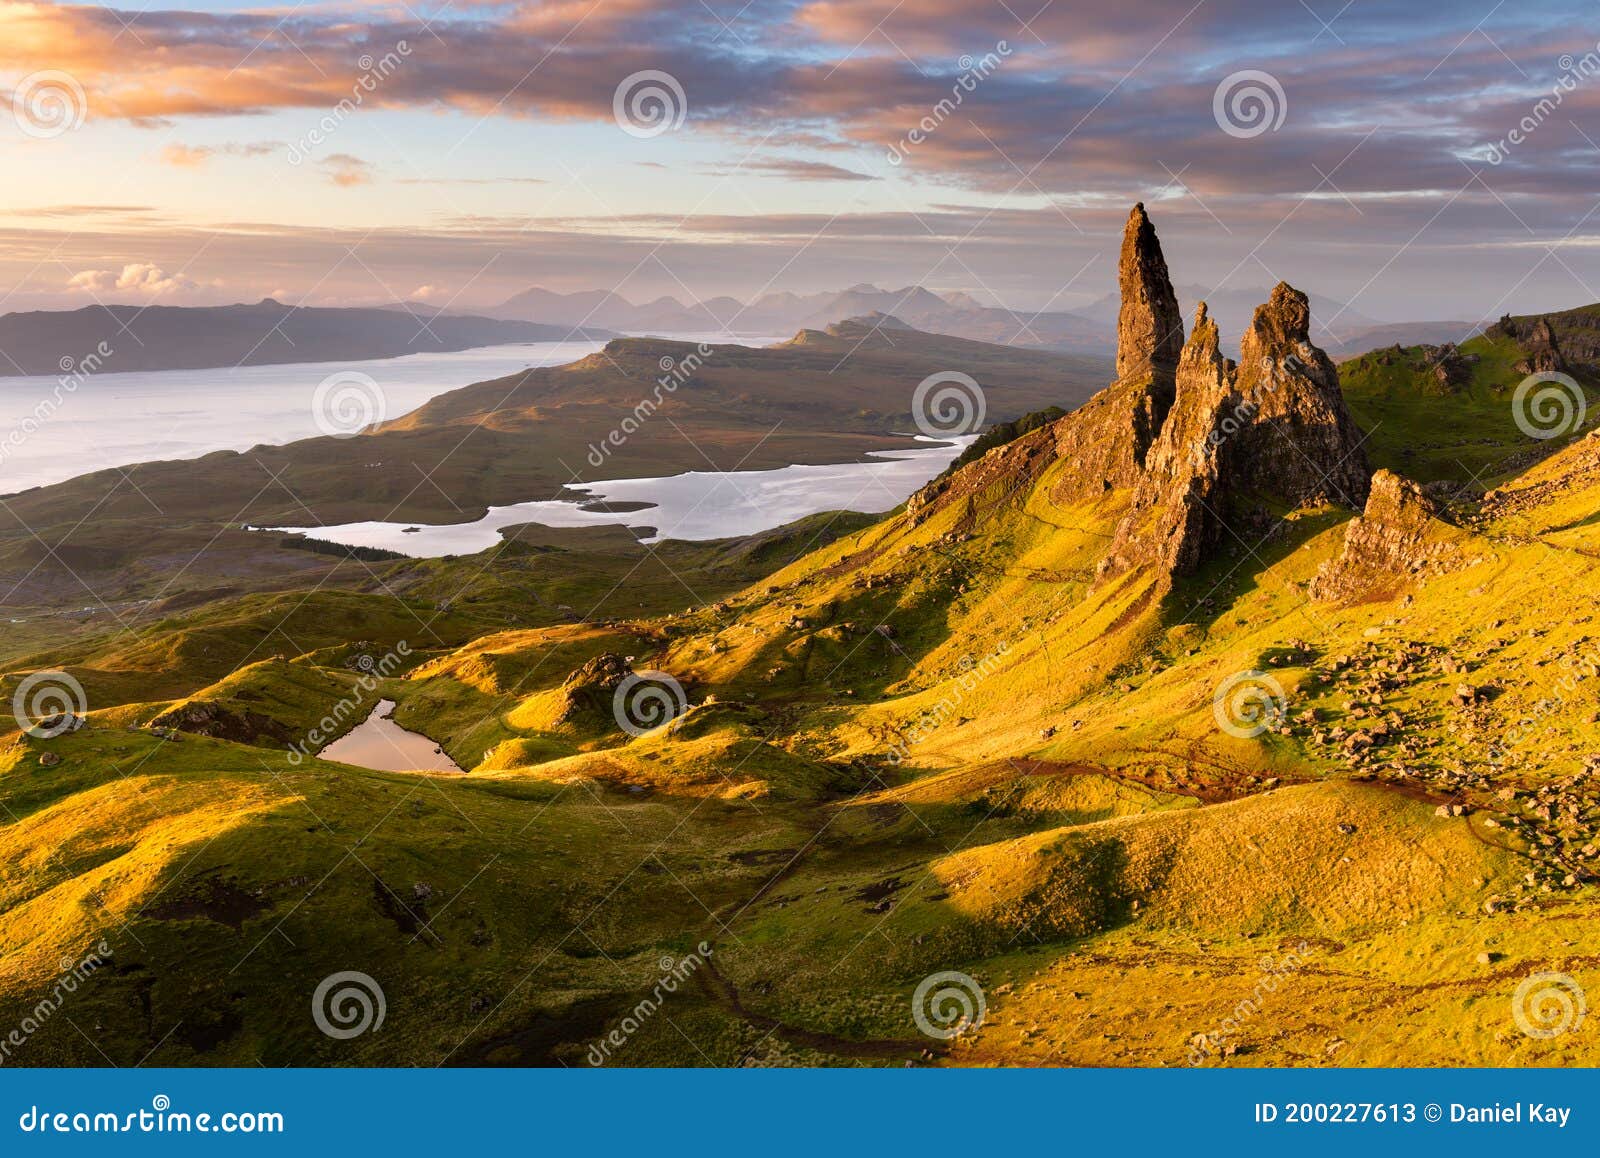 colourful sunrise at scotlands most iconic viewpoint; the old man of storr on the isle of skye.